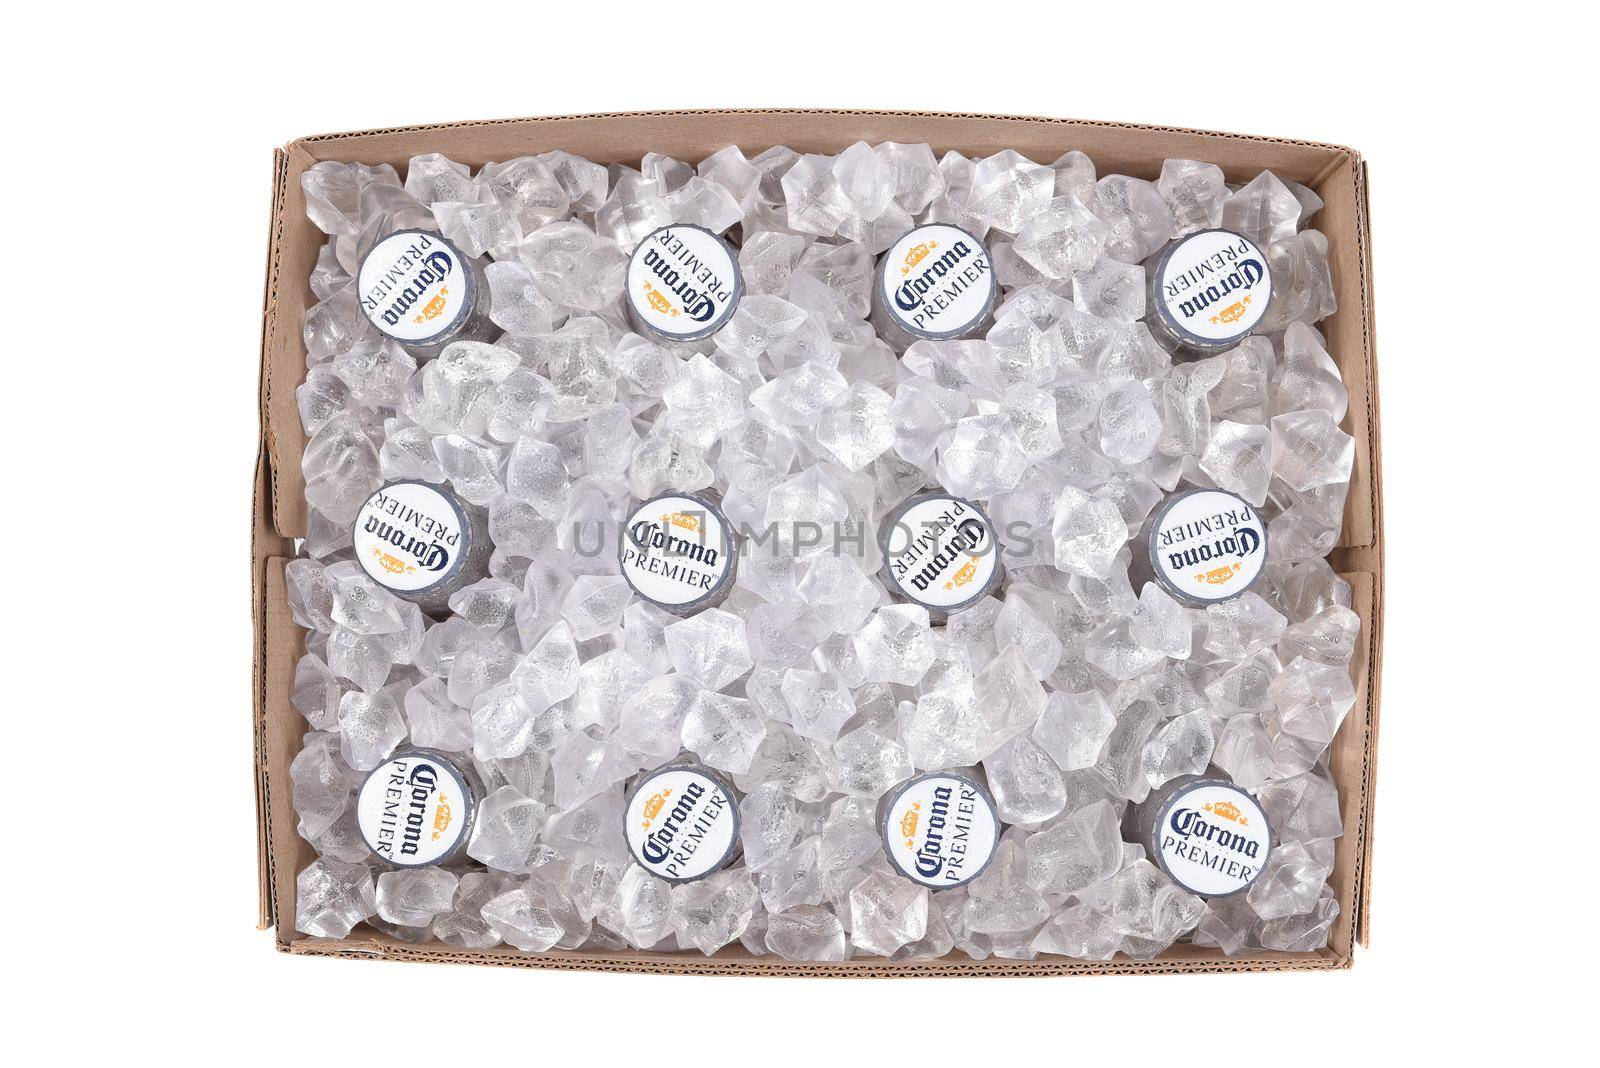 IRVINE, CALIFORNIA - 10 MAR 2020: High angle view of a 12 pack of Corona Premier bottles with ice cubs in the box. by sCukrov